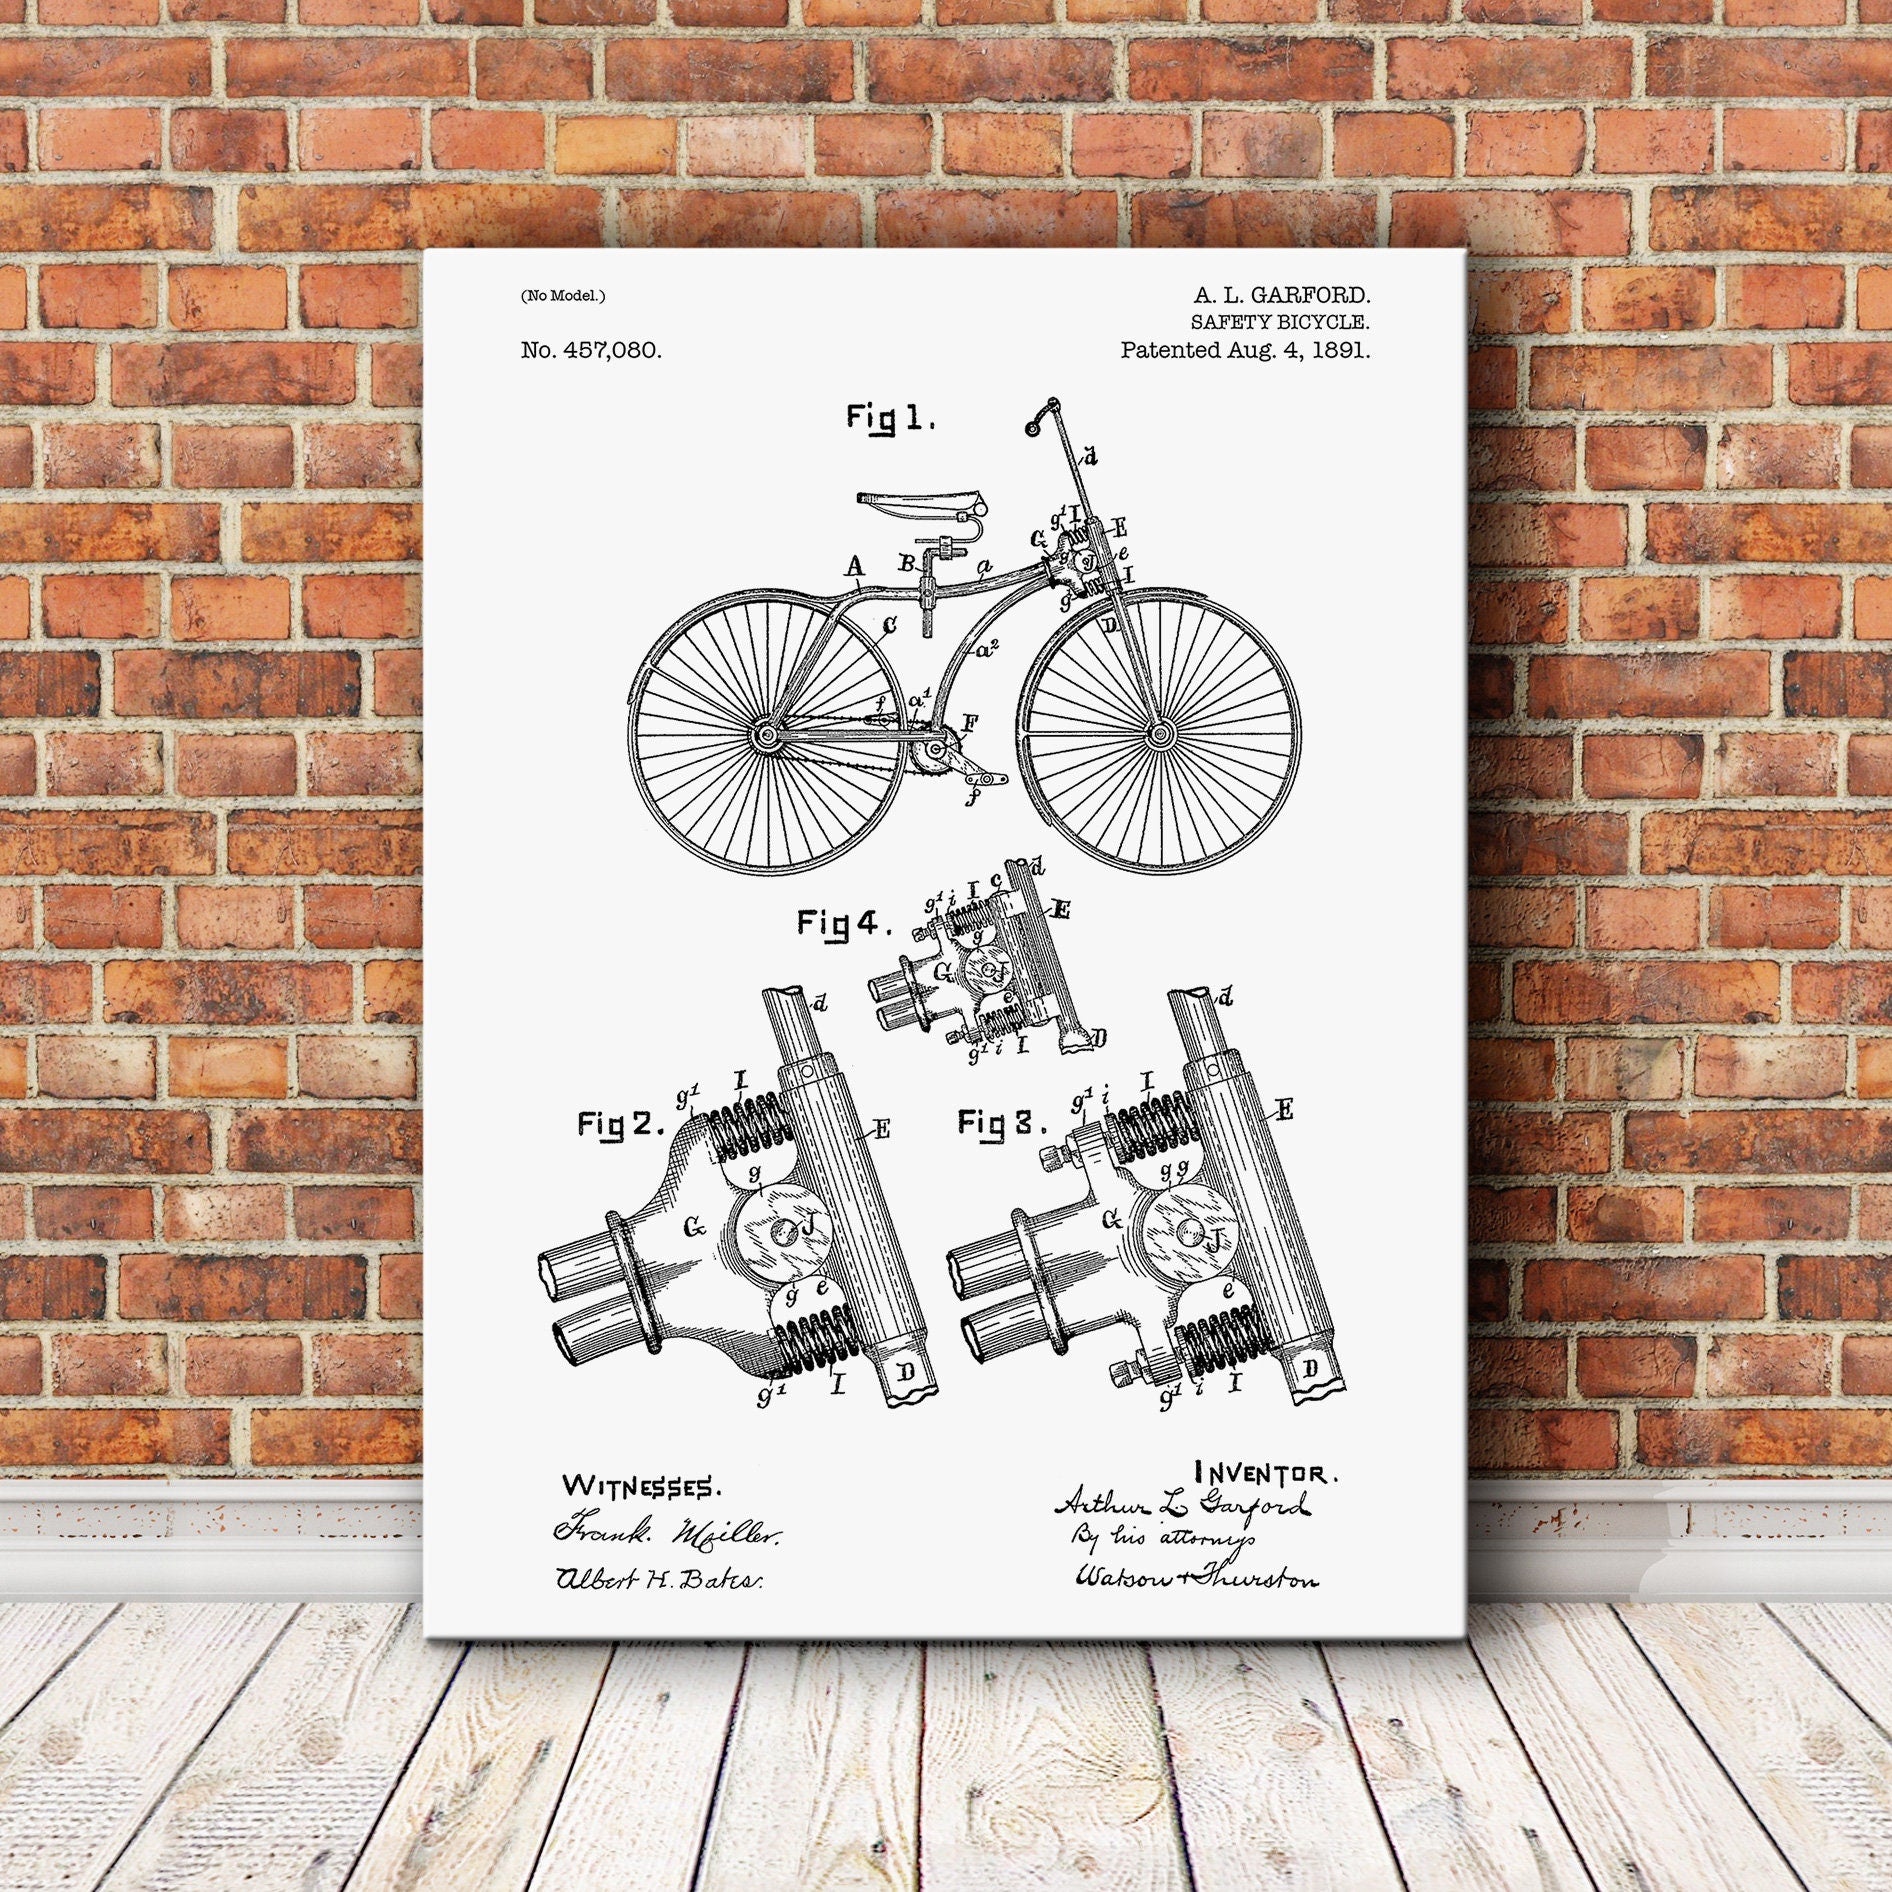 Sports Patent print, Safety Bicycle for Sports Patent print, Patent print, Patent print design, Vintage patent print, Sports Art